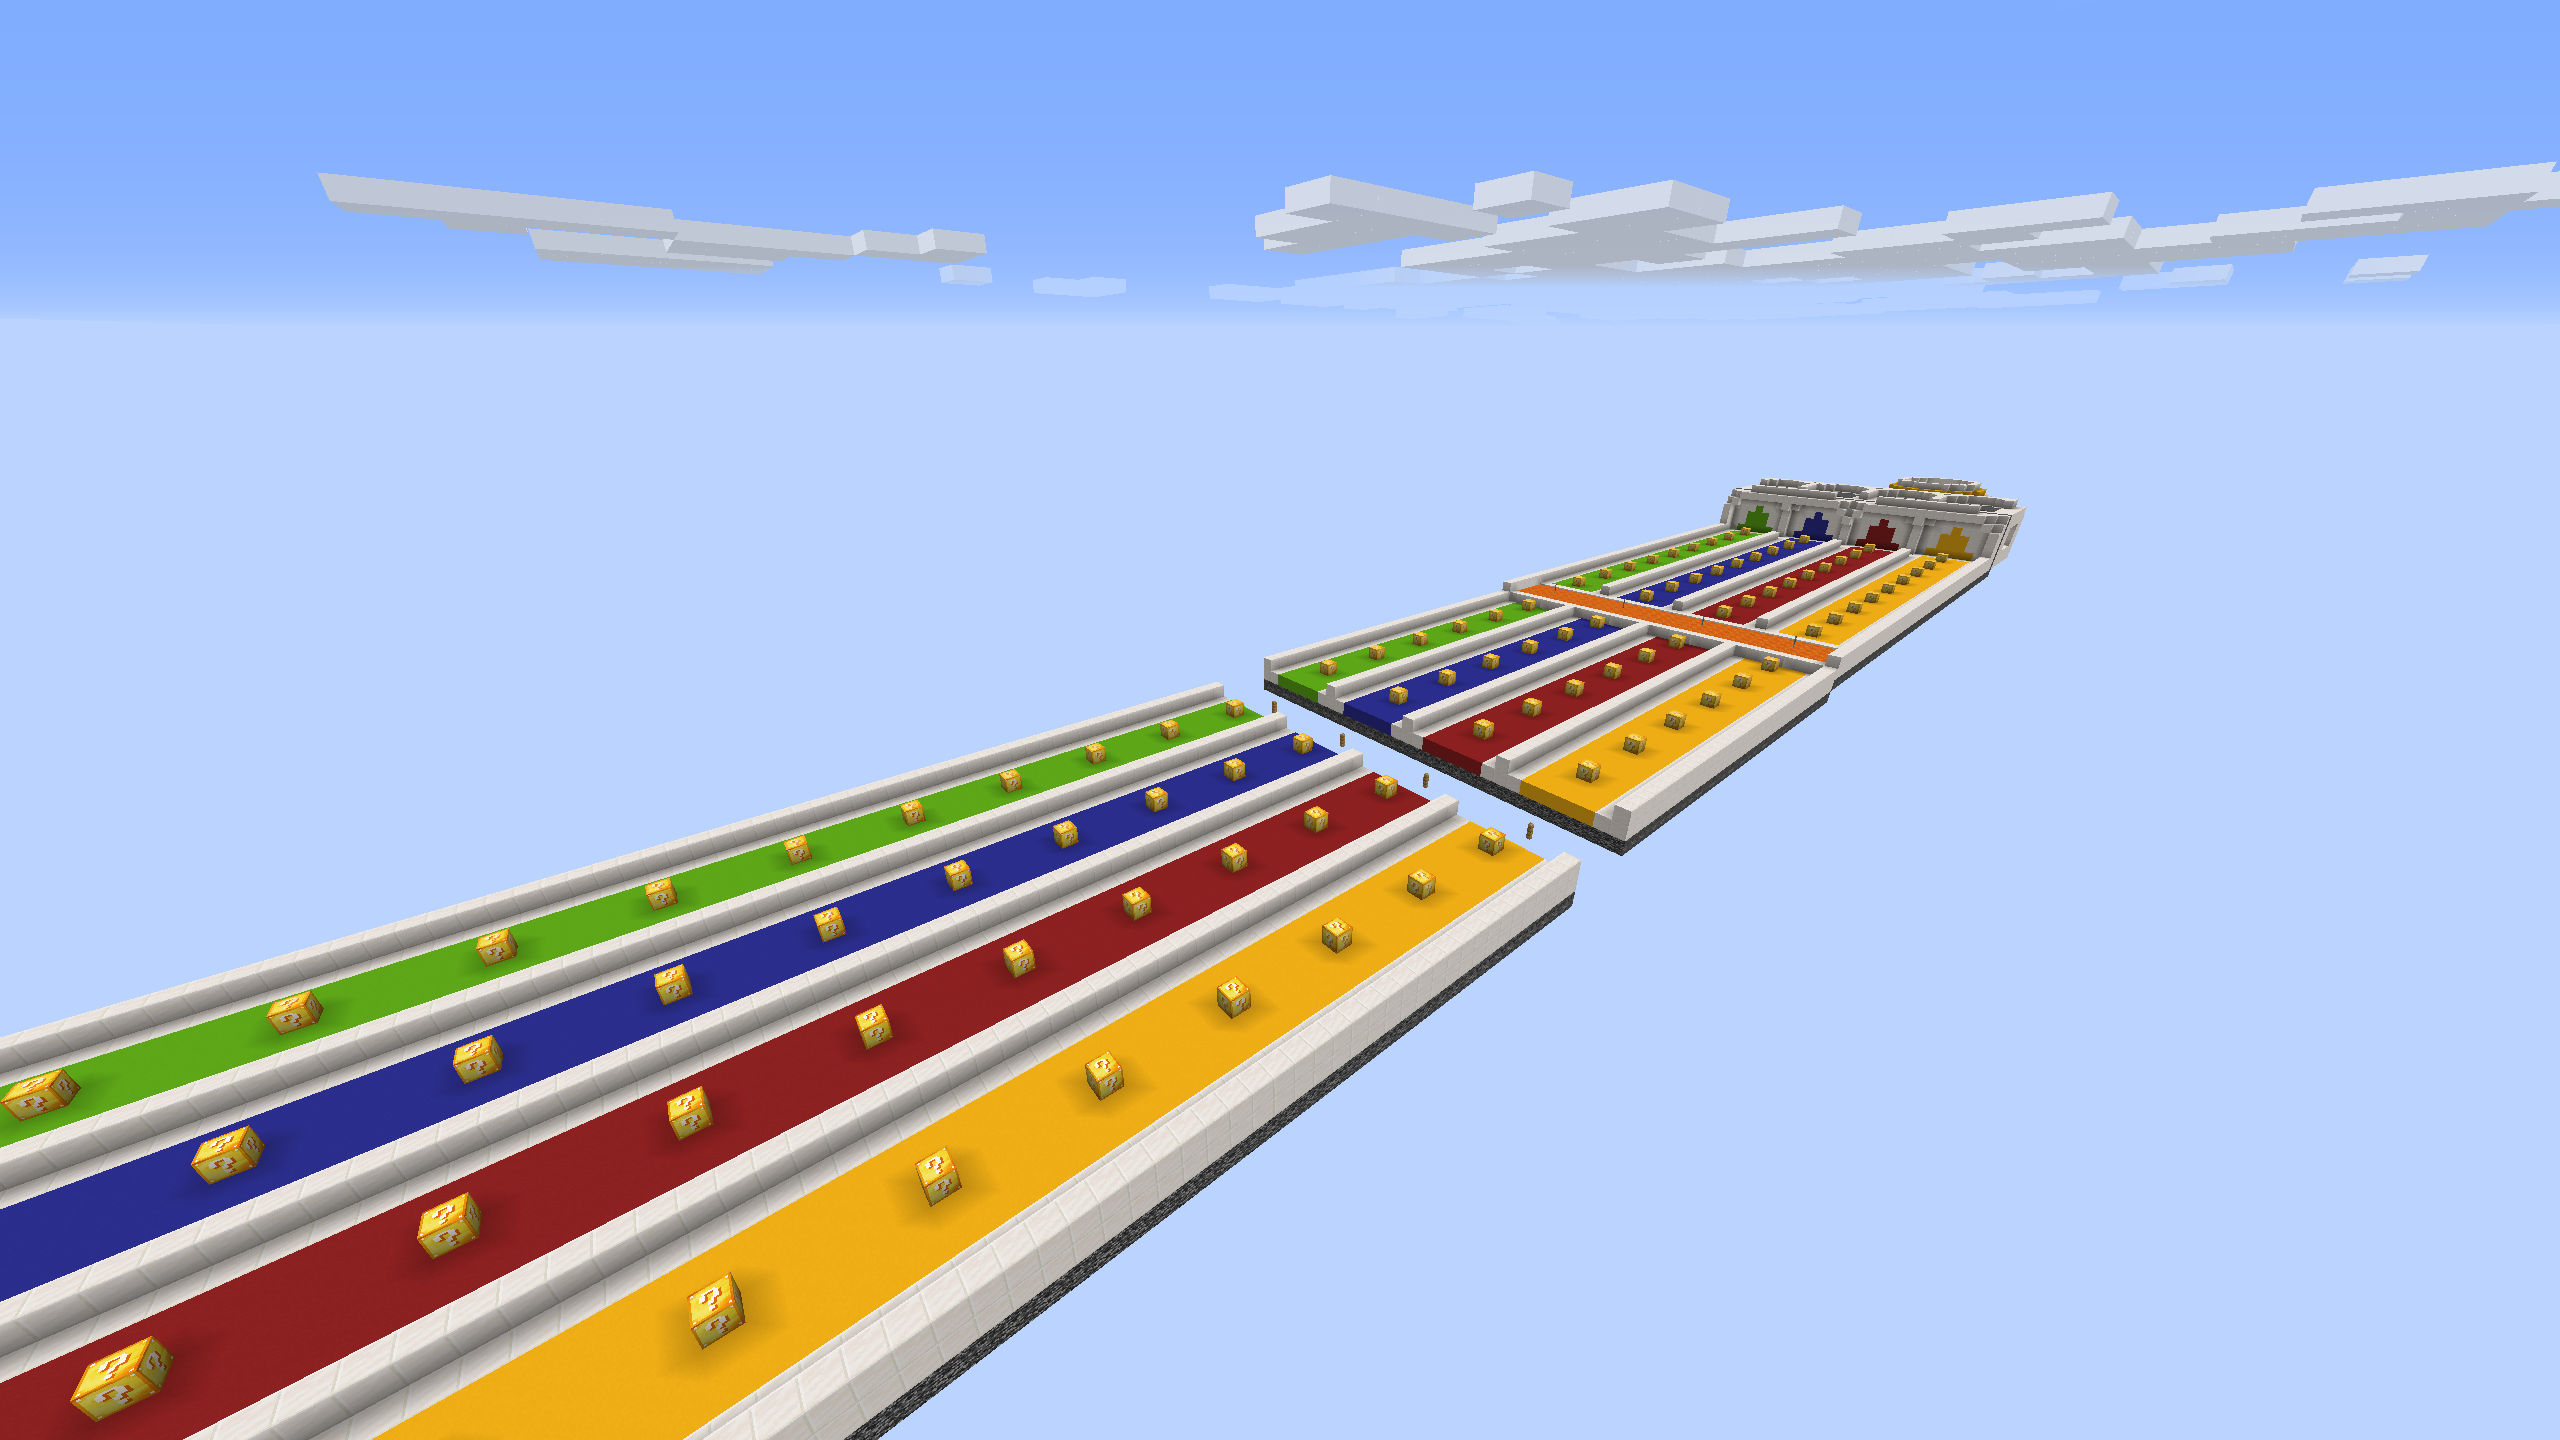 Lucky Block Race 1.8 Map Download - Colaboratory